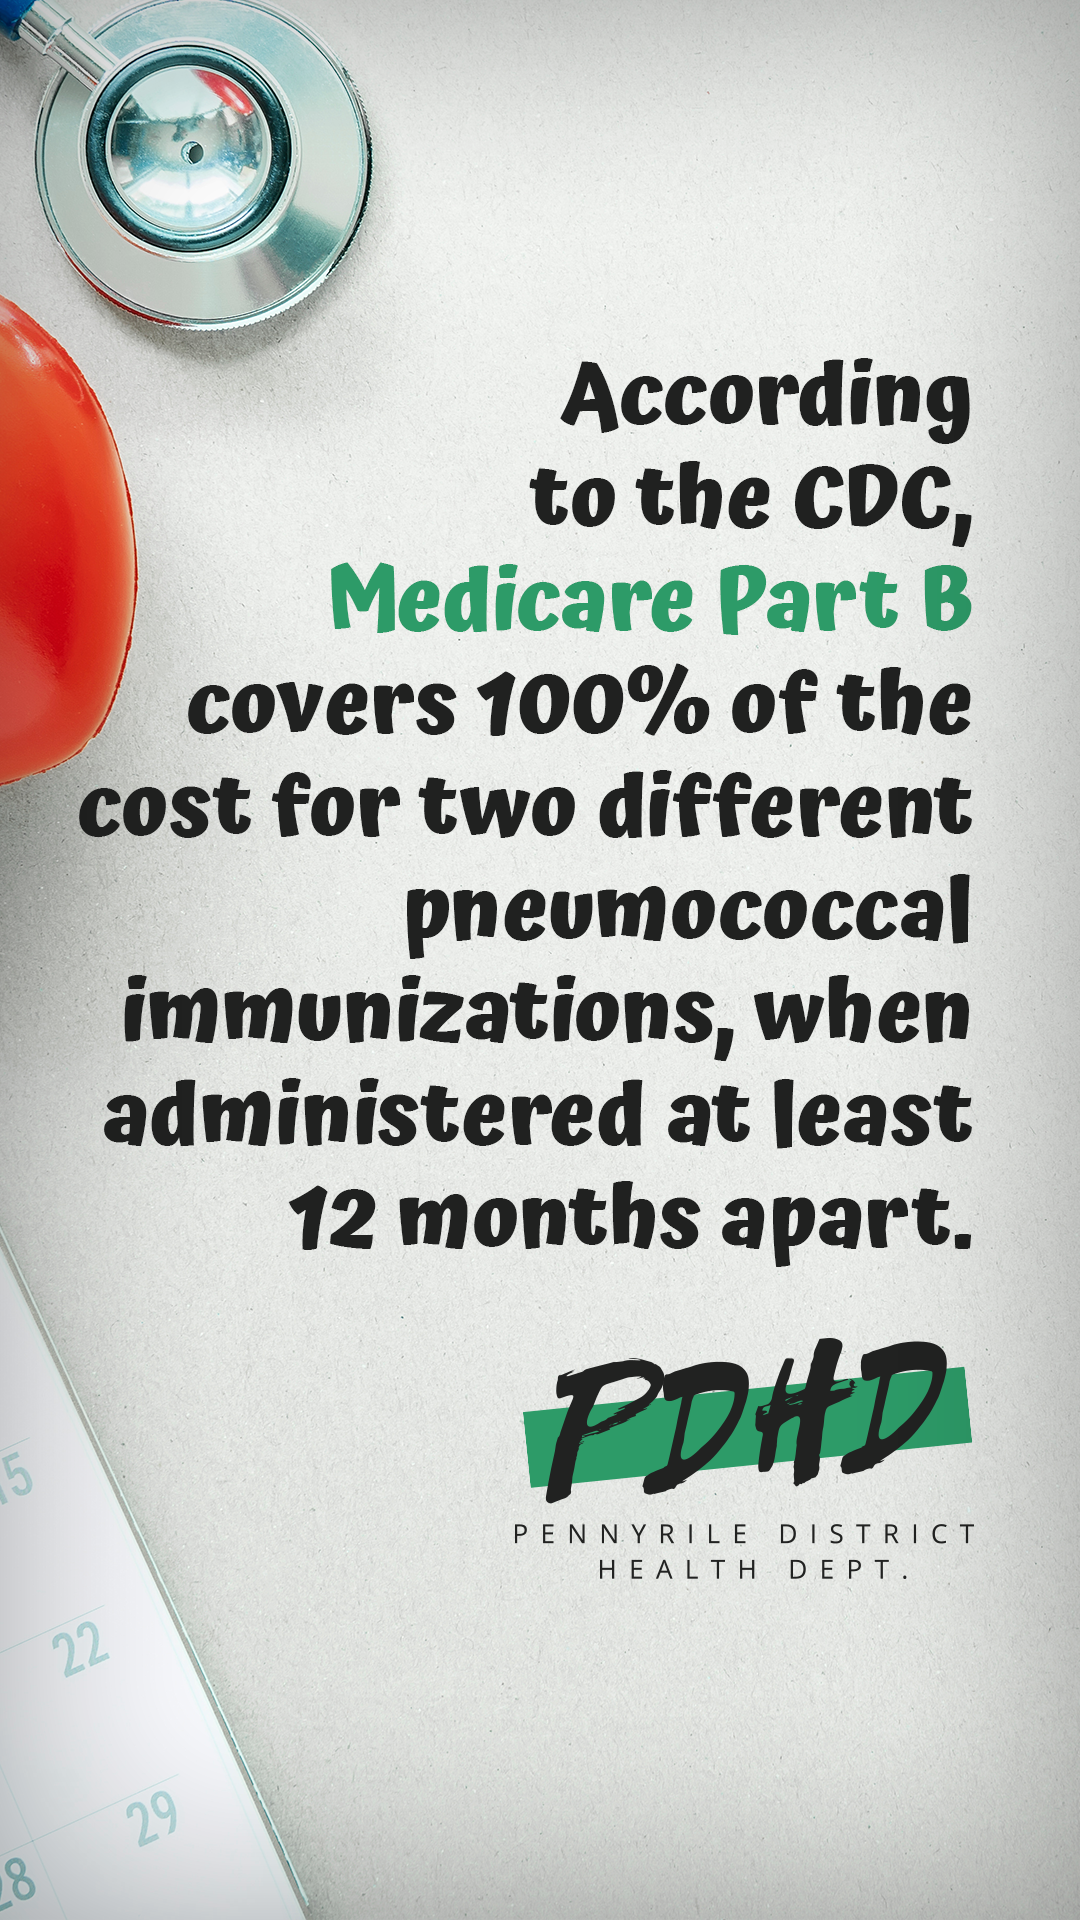 According to the CDC, Medicare Part B covers 100% of the cost for two different pneumococcal immunizations, when administered at least 12 months apart.